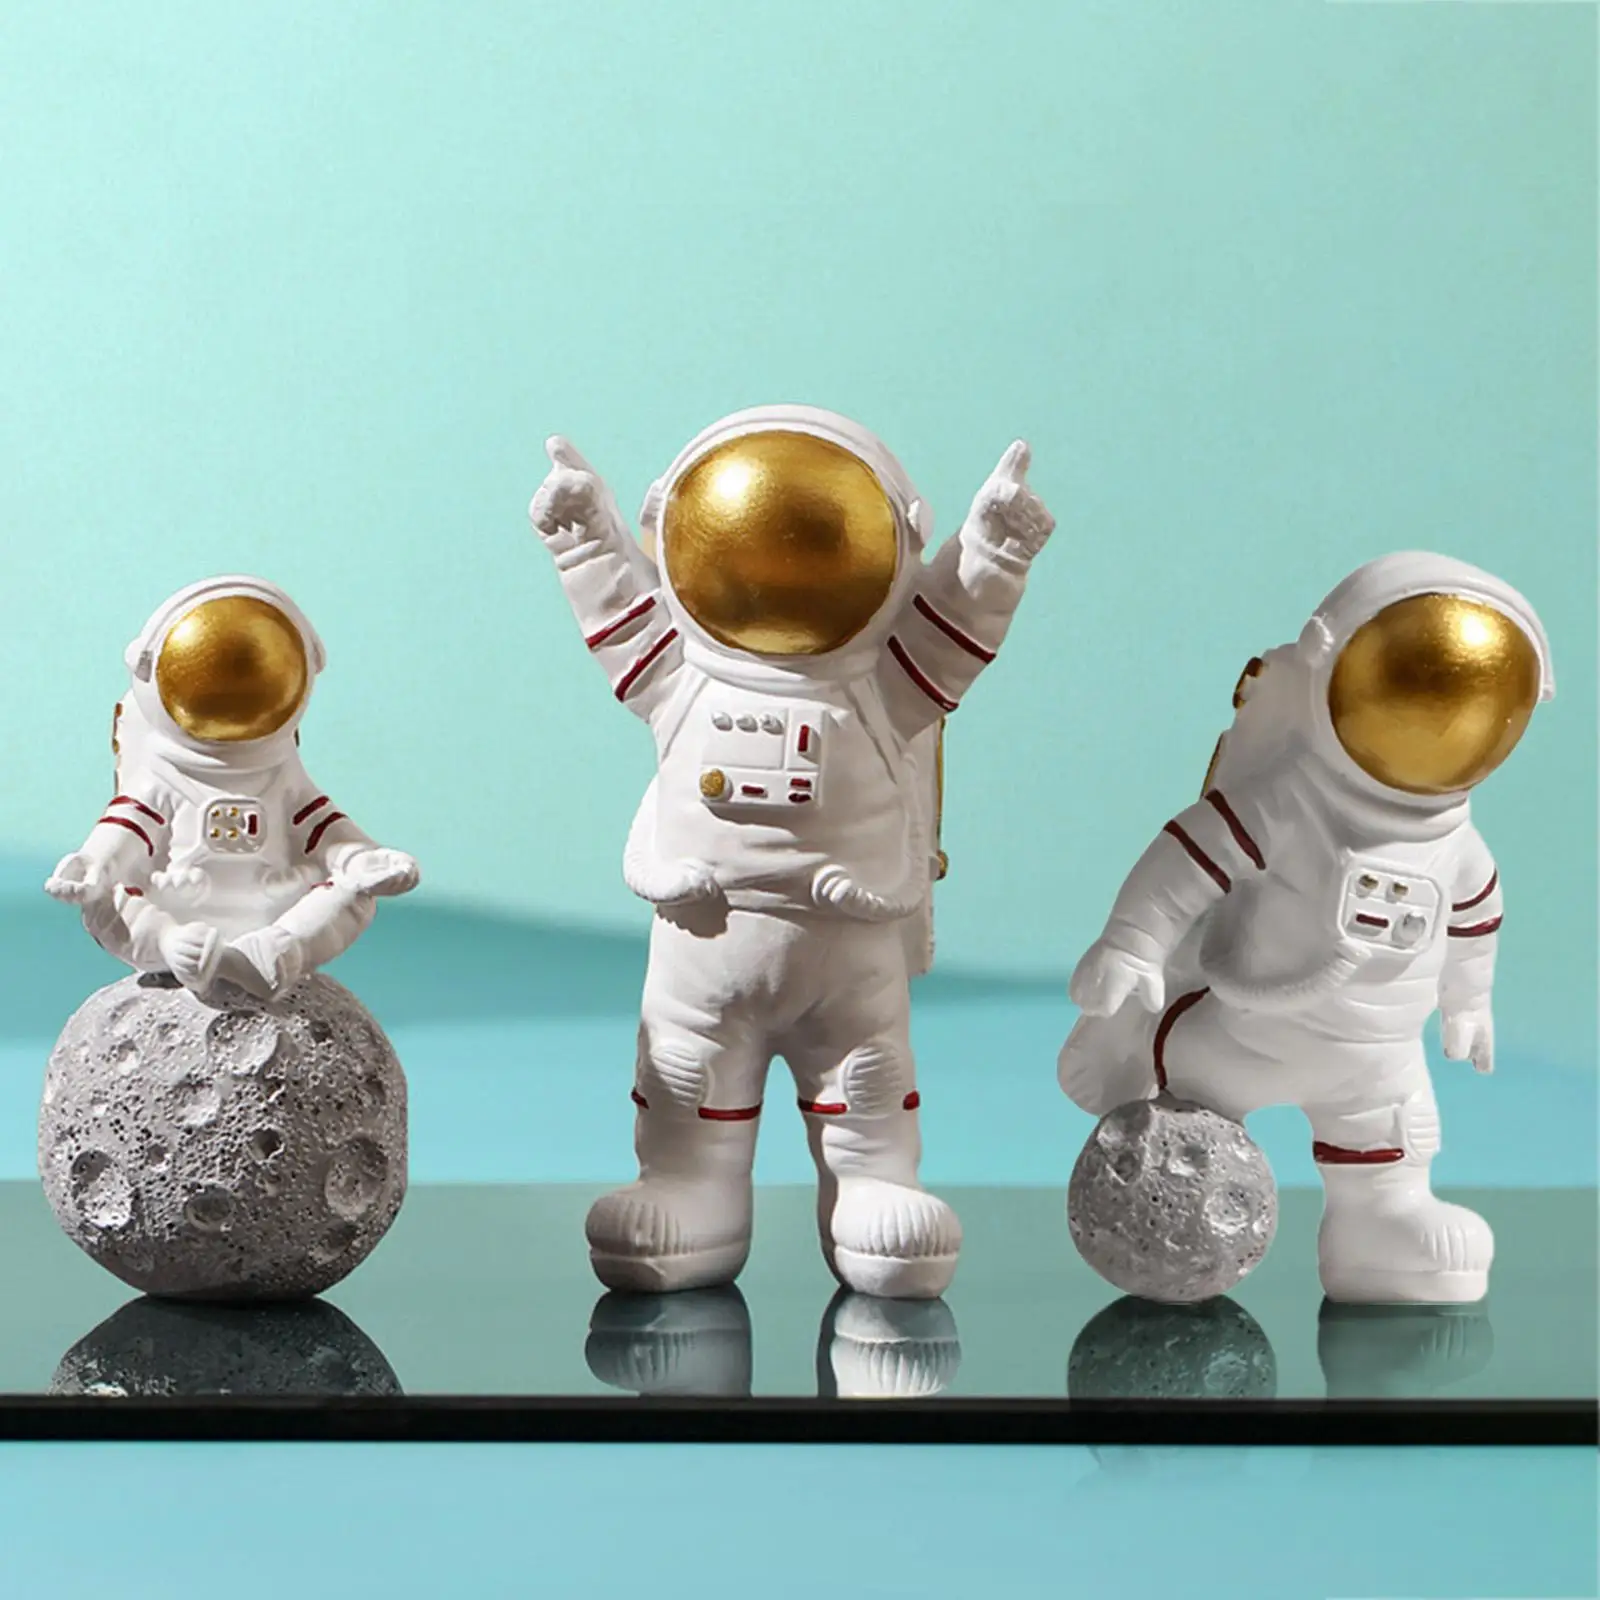 3 Pieces Astronaut Statue Cake Topper Decor Spaceman Figurines for Cabinet